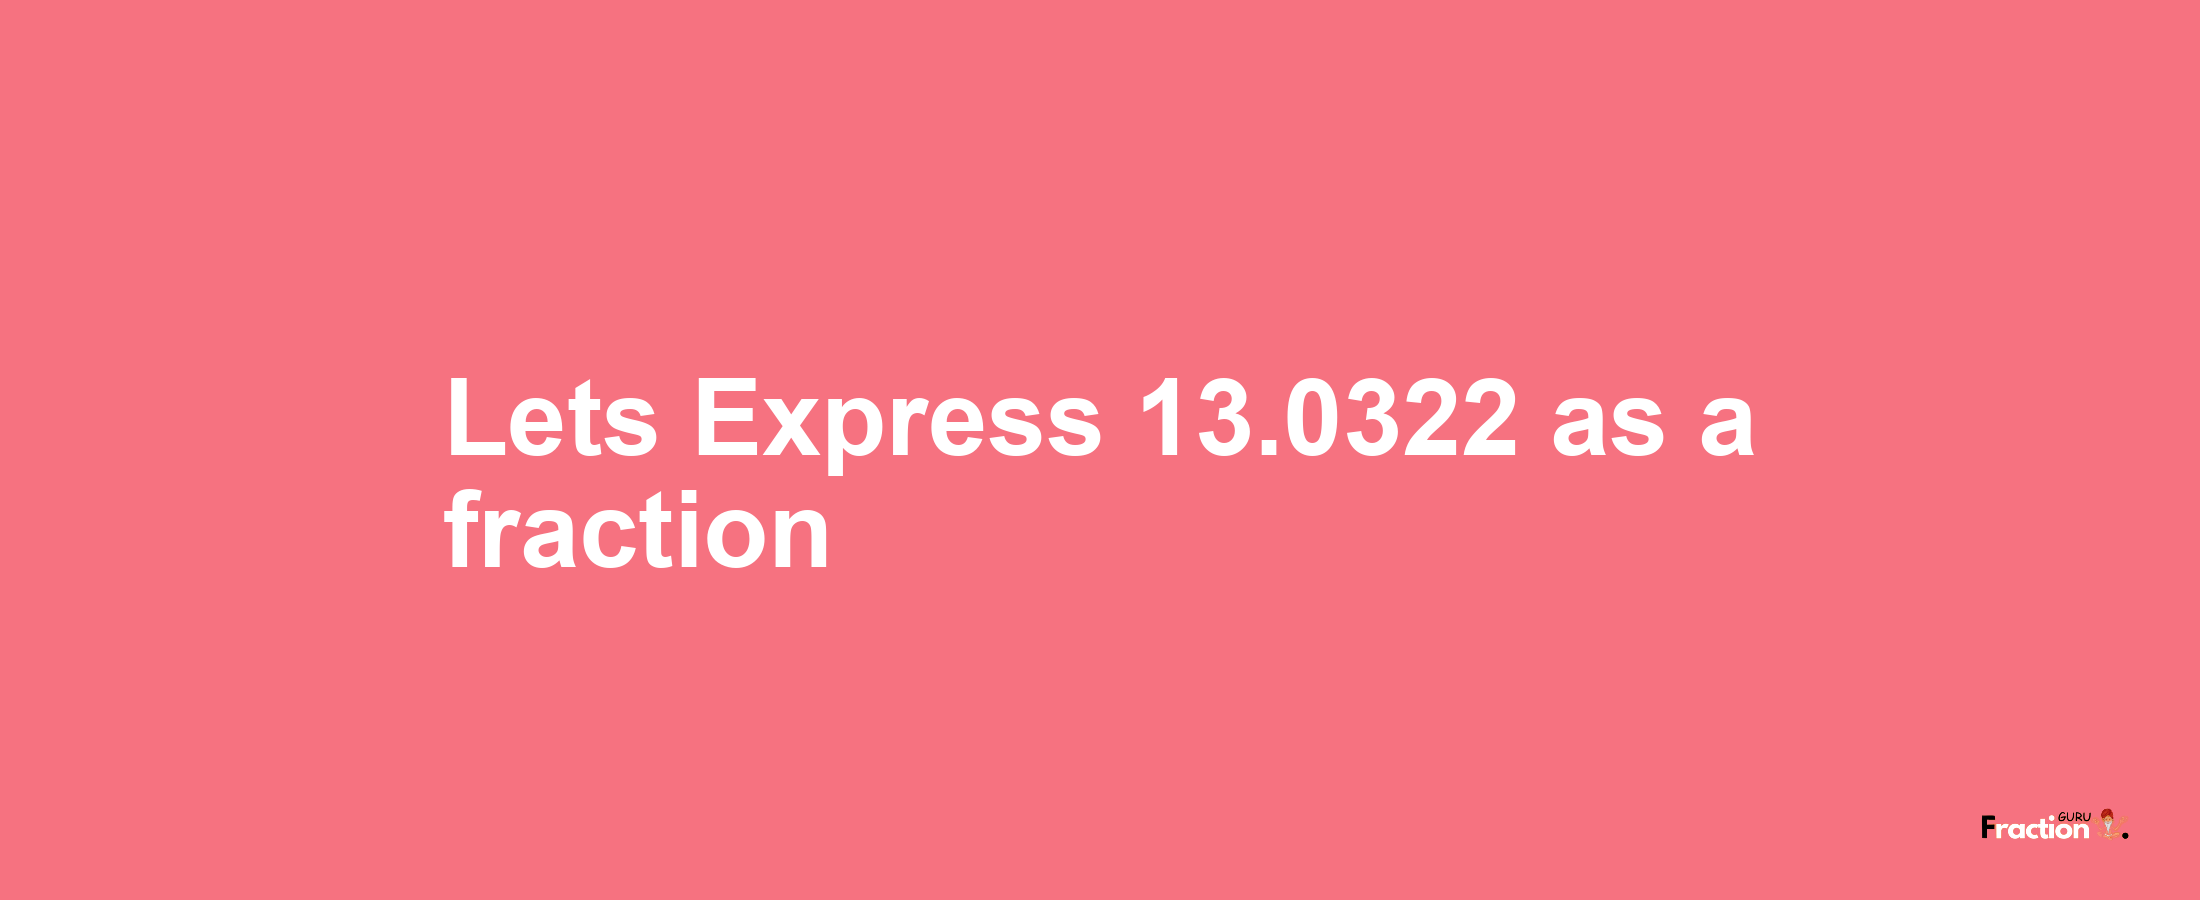 Lets Express 13.0322 as afraction